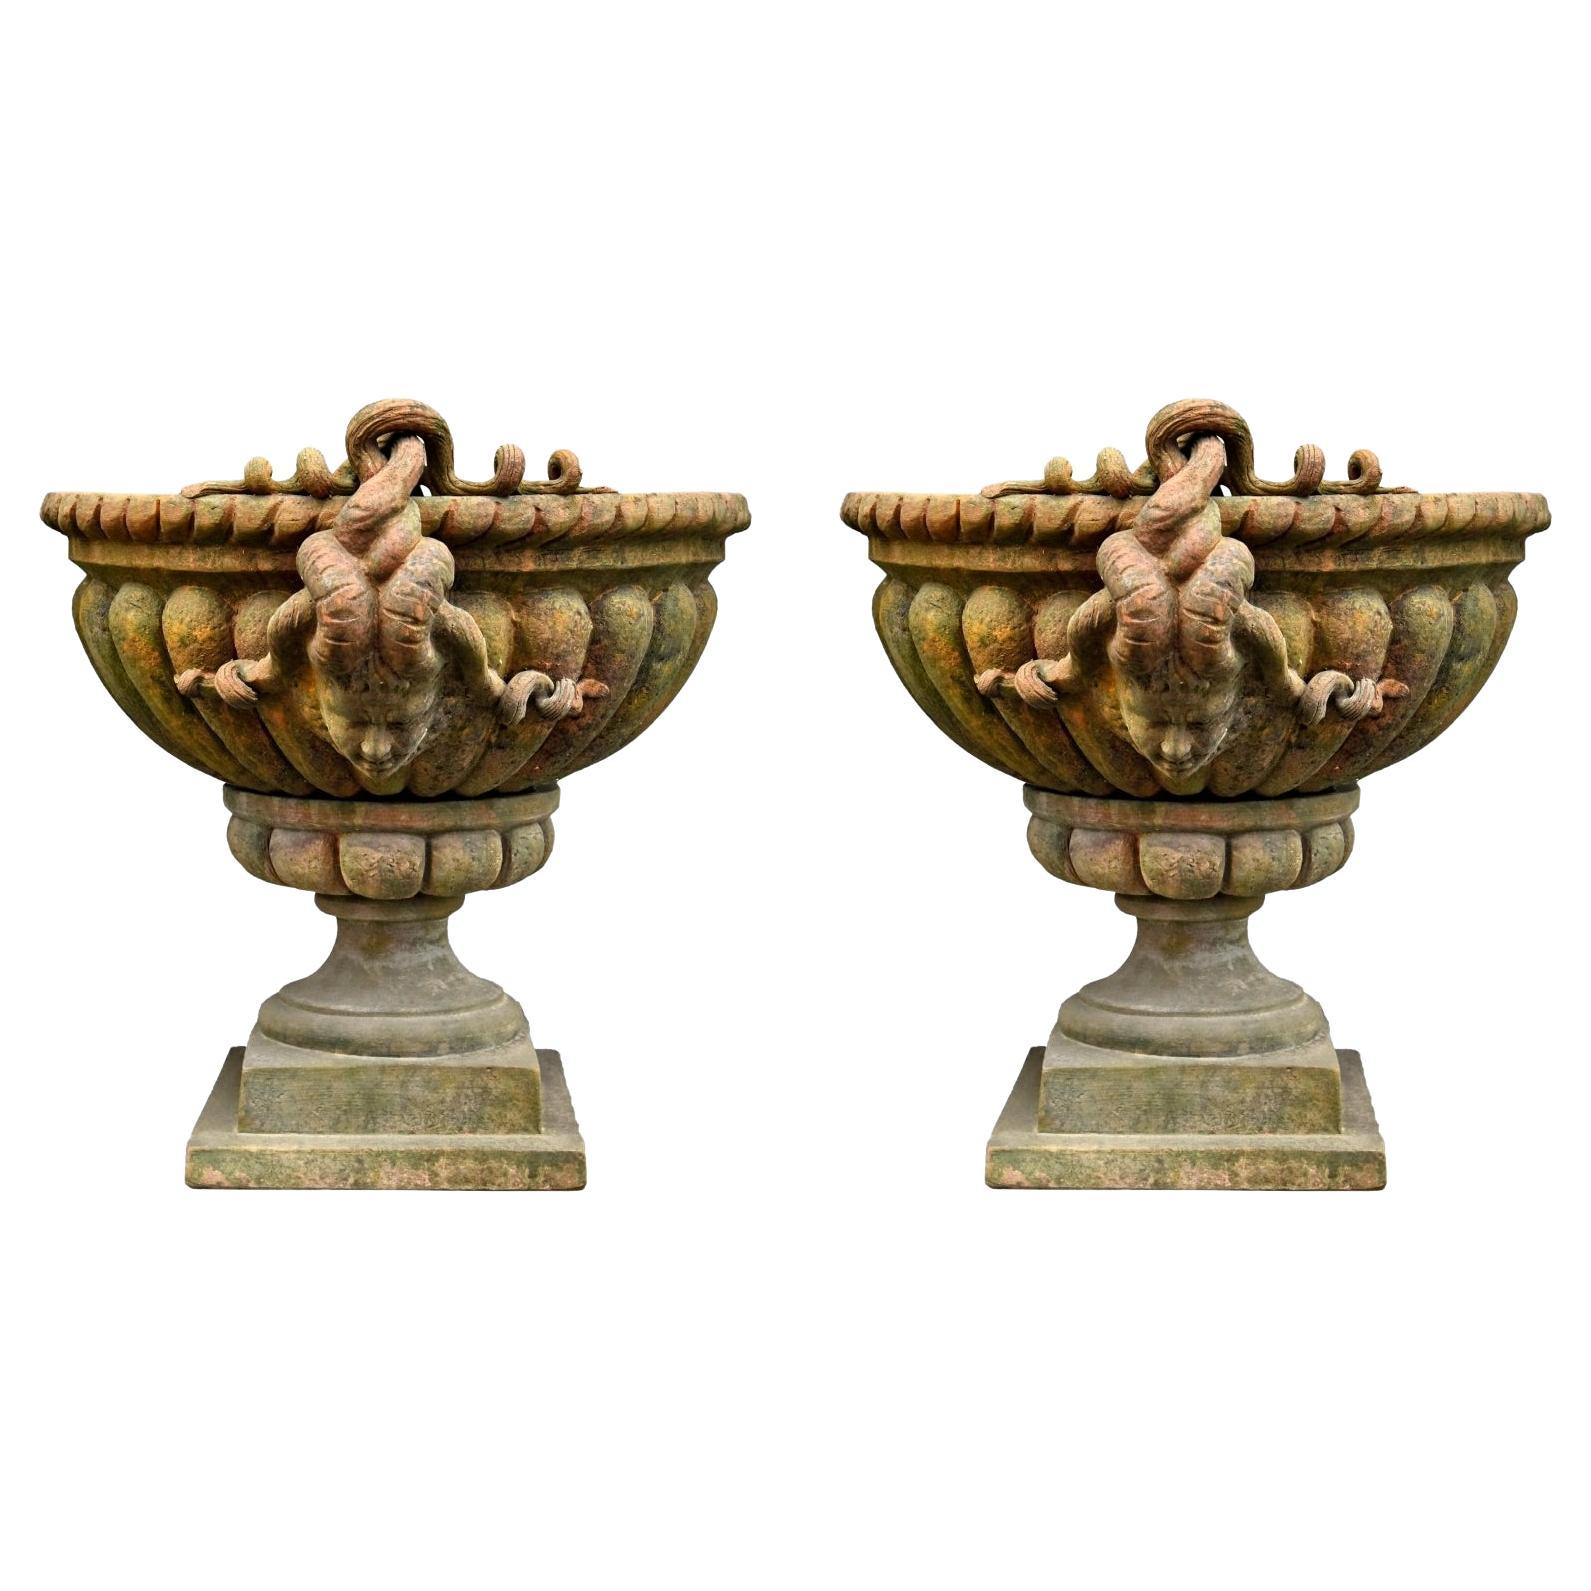 Pair of Baccellato Vases with Medusa Heads Terracotta Goblet, 19th Century